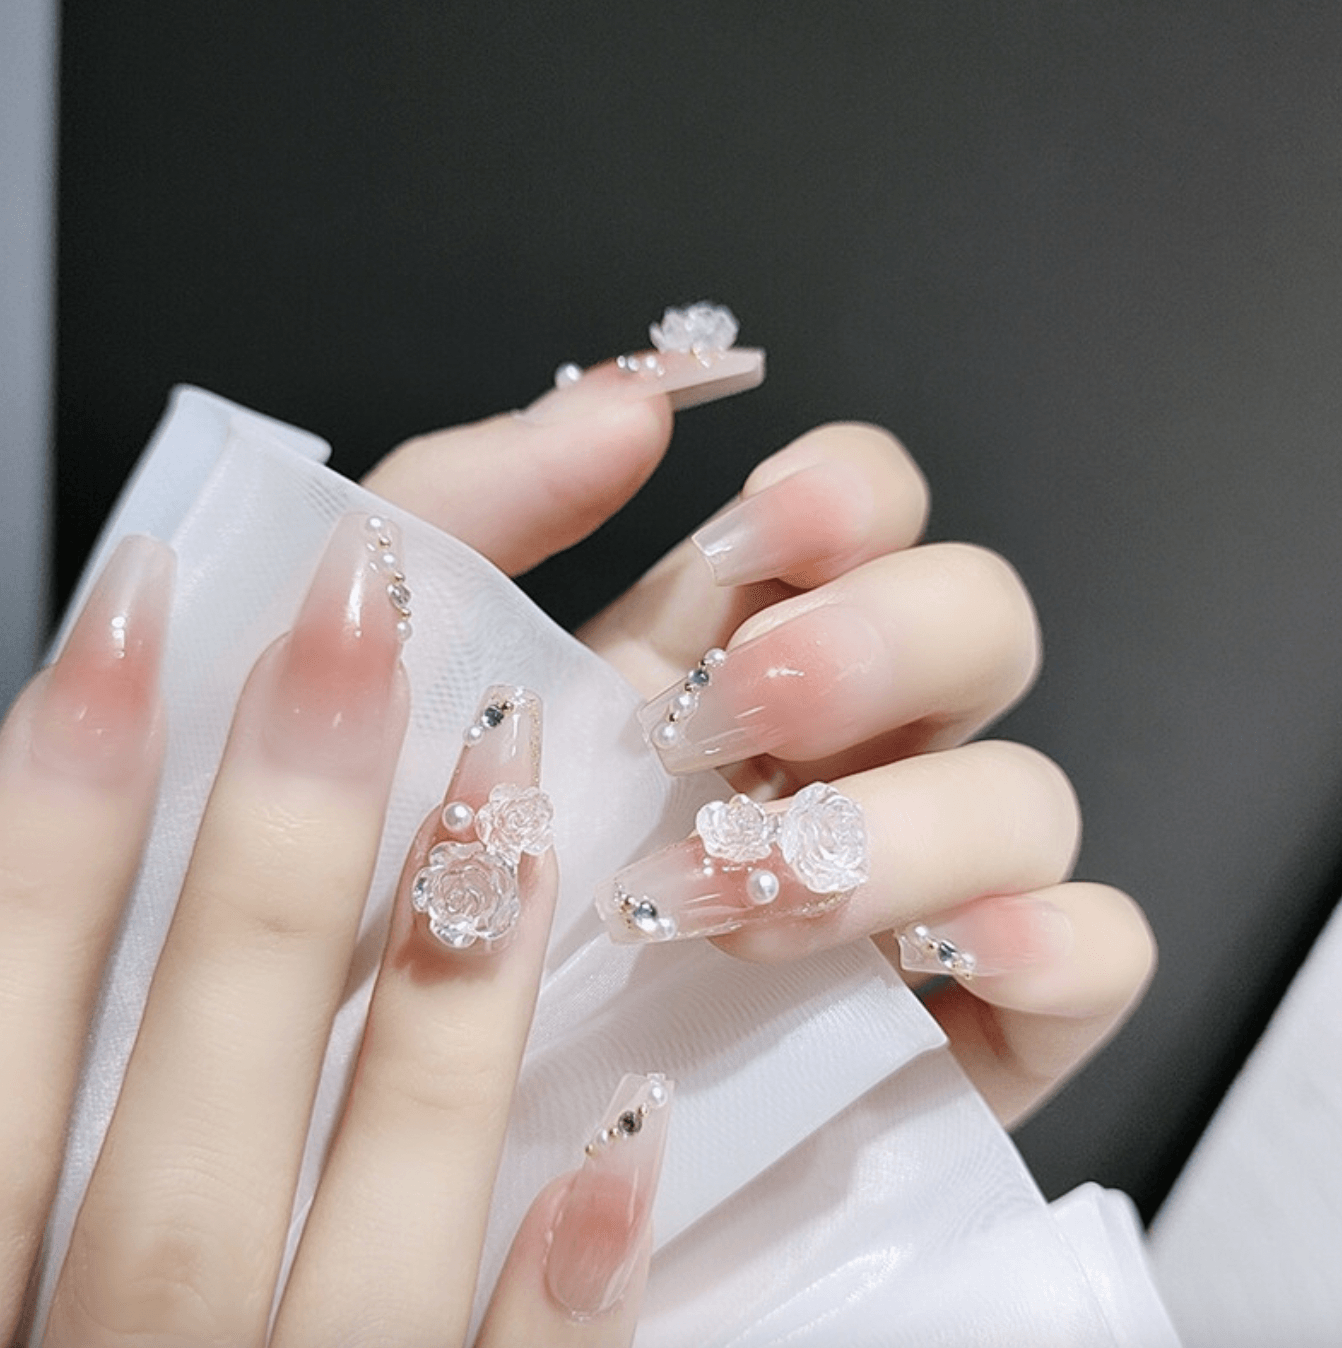 Flower Press on Nails Short Pink Cherry Blossoms Fake Nails French